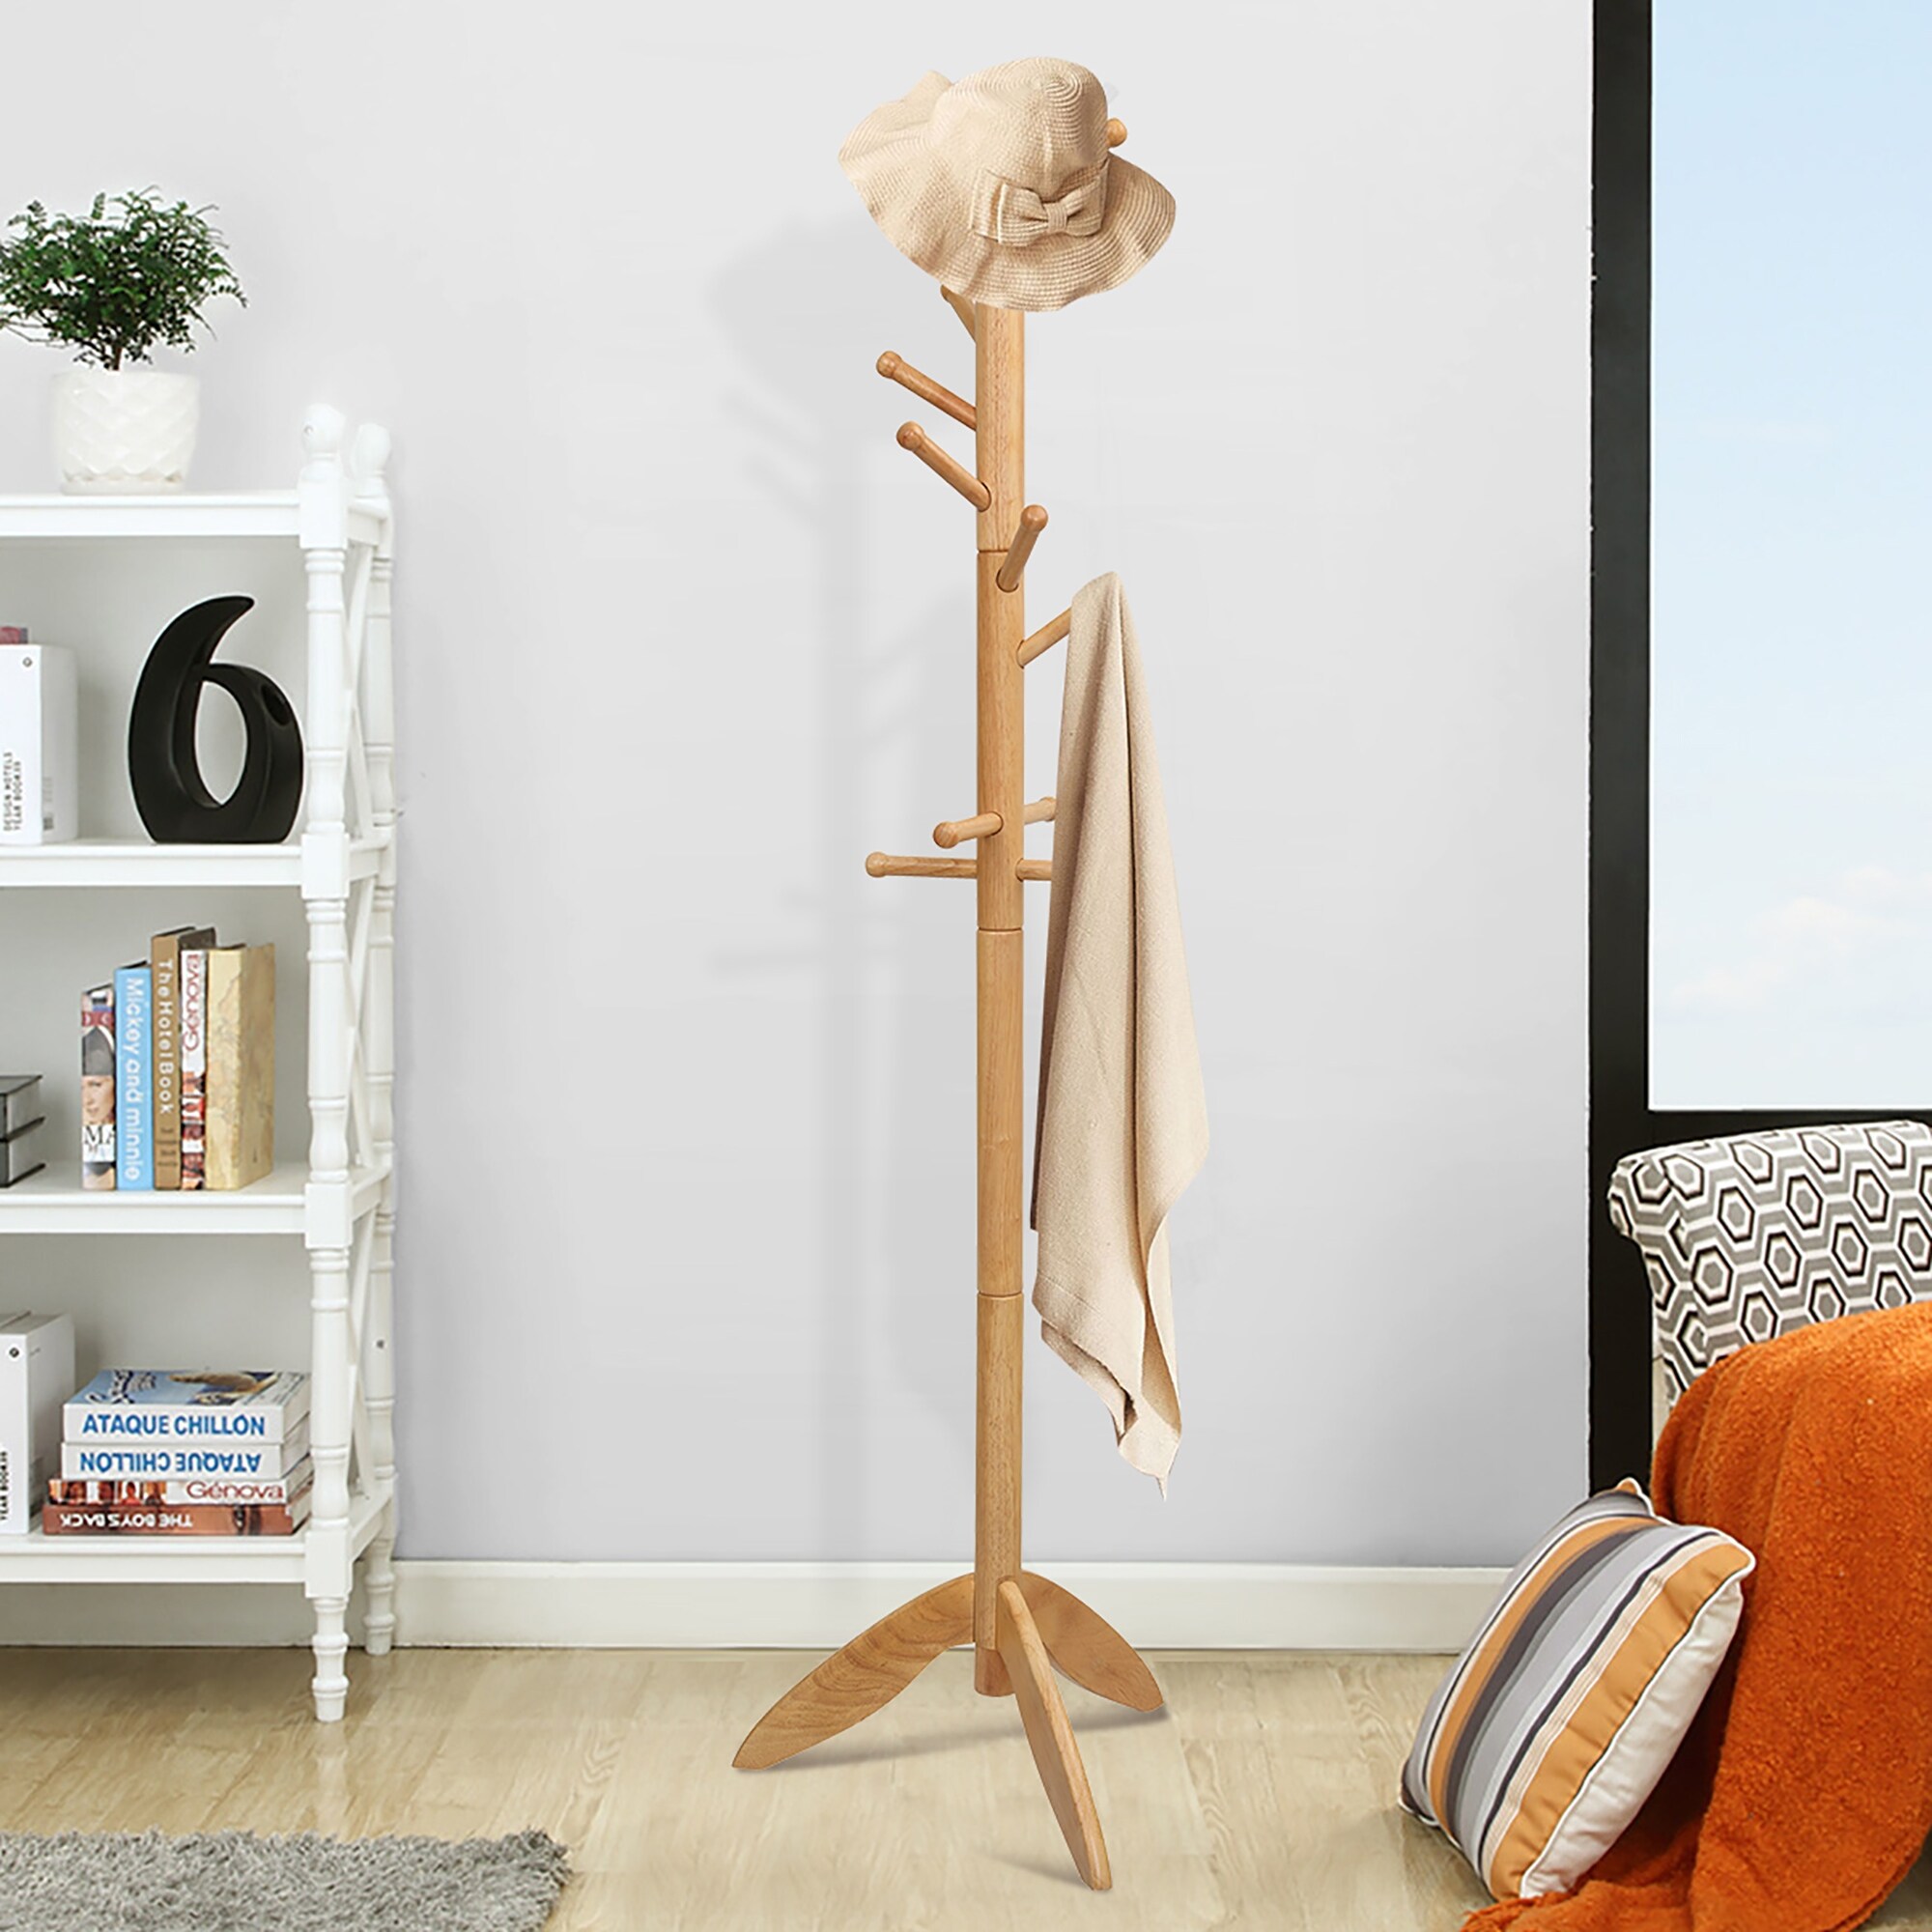 White Entryway Wall Mounted Coat Rack with 4 Dual Hooks Living Room Wooden Storage Shelf